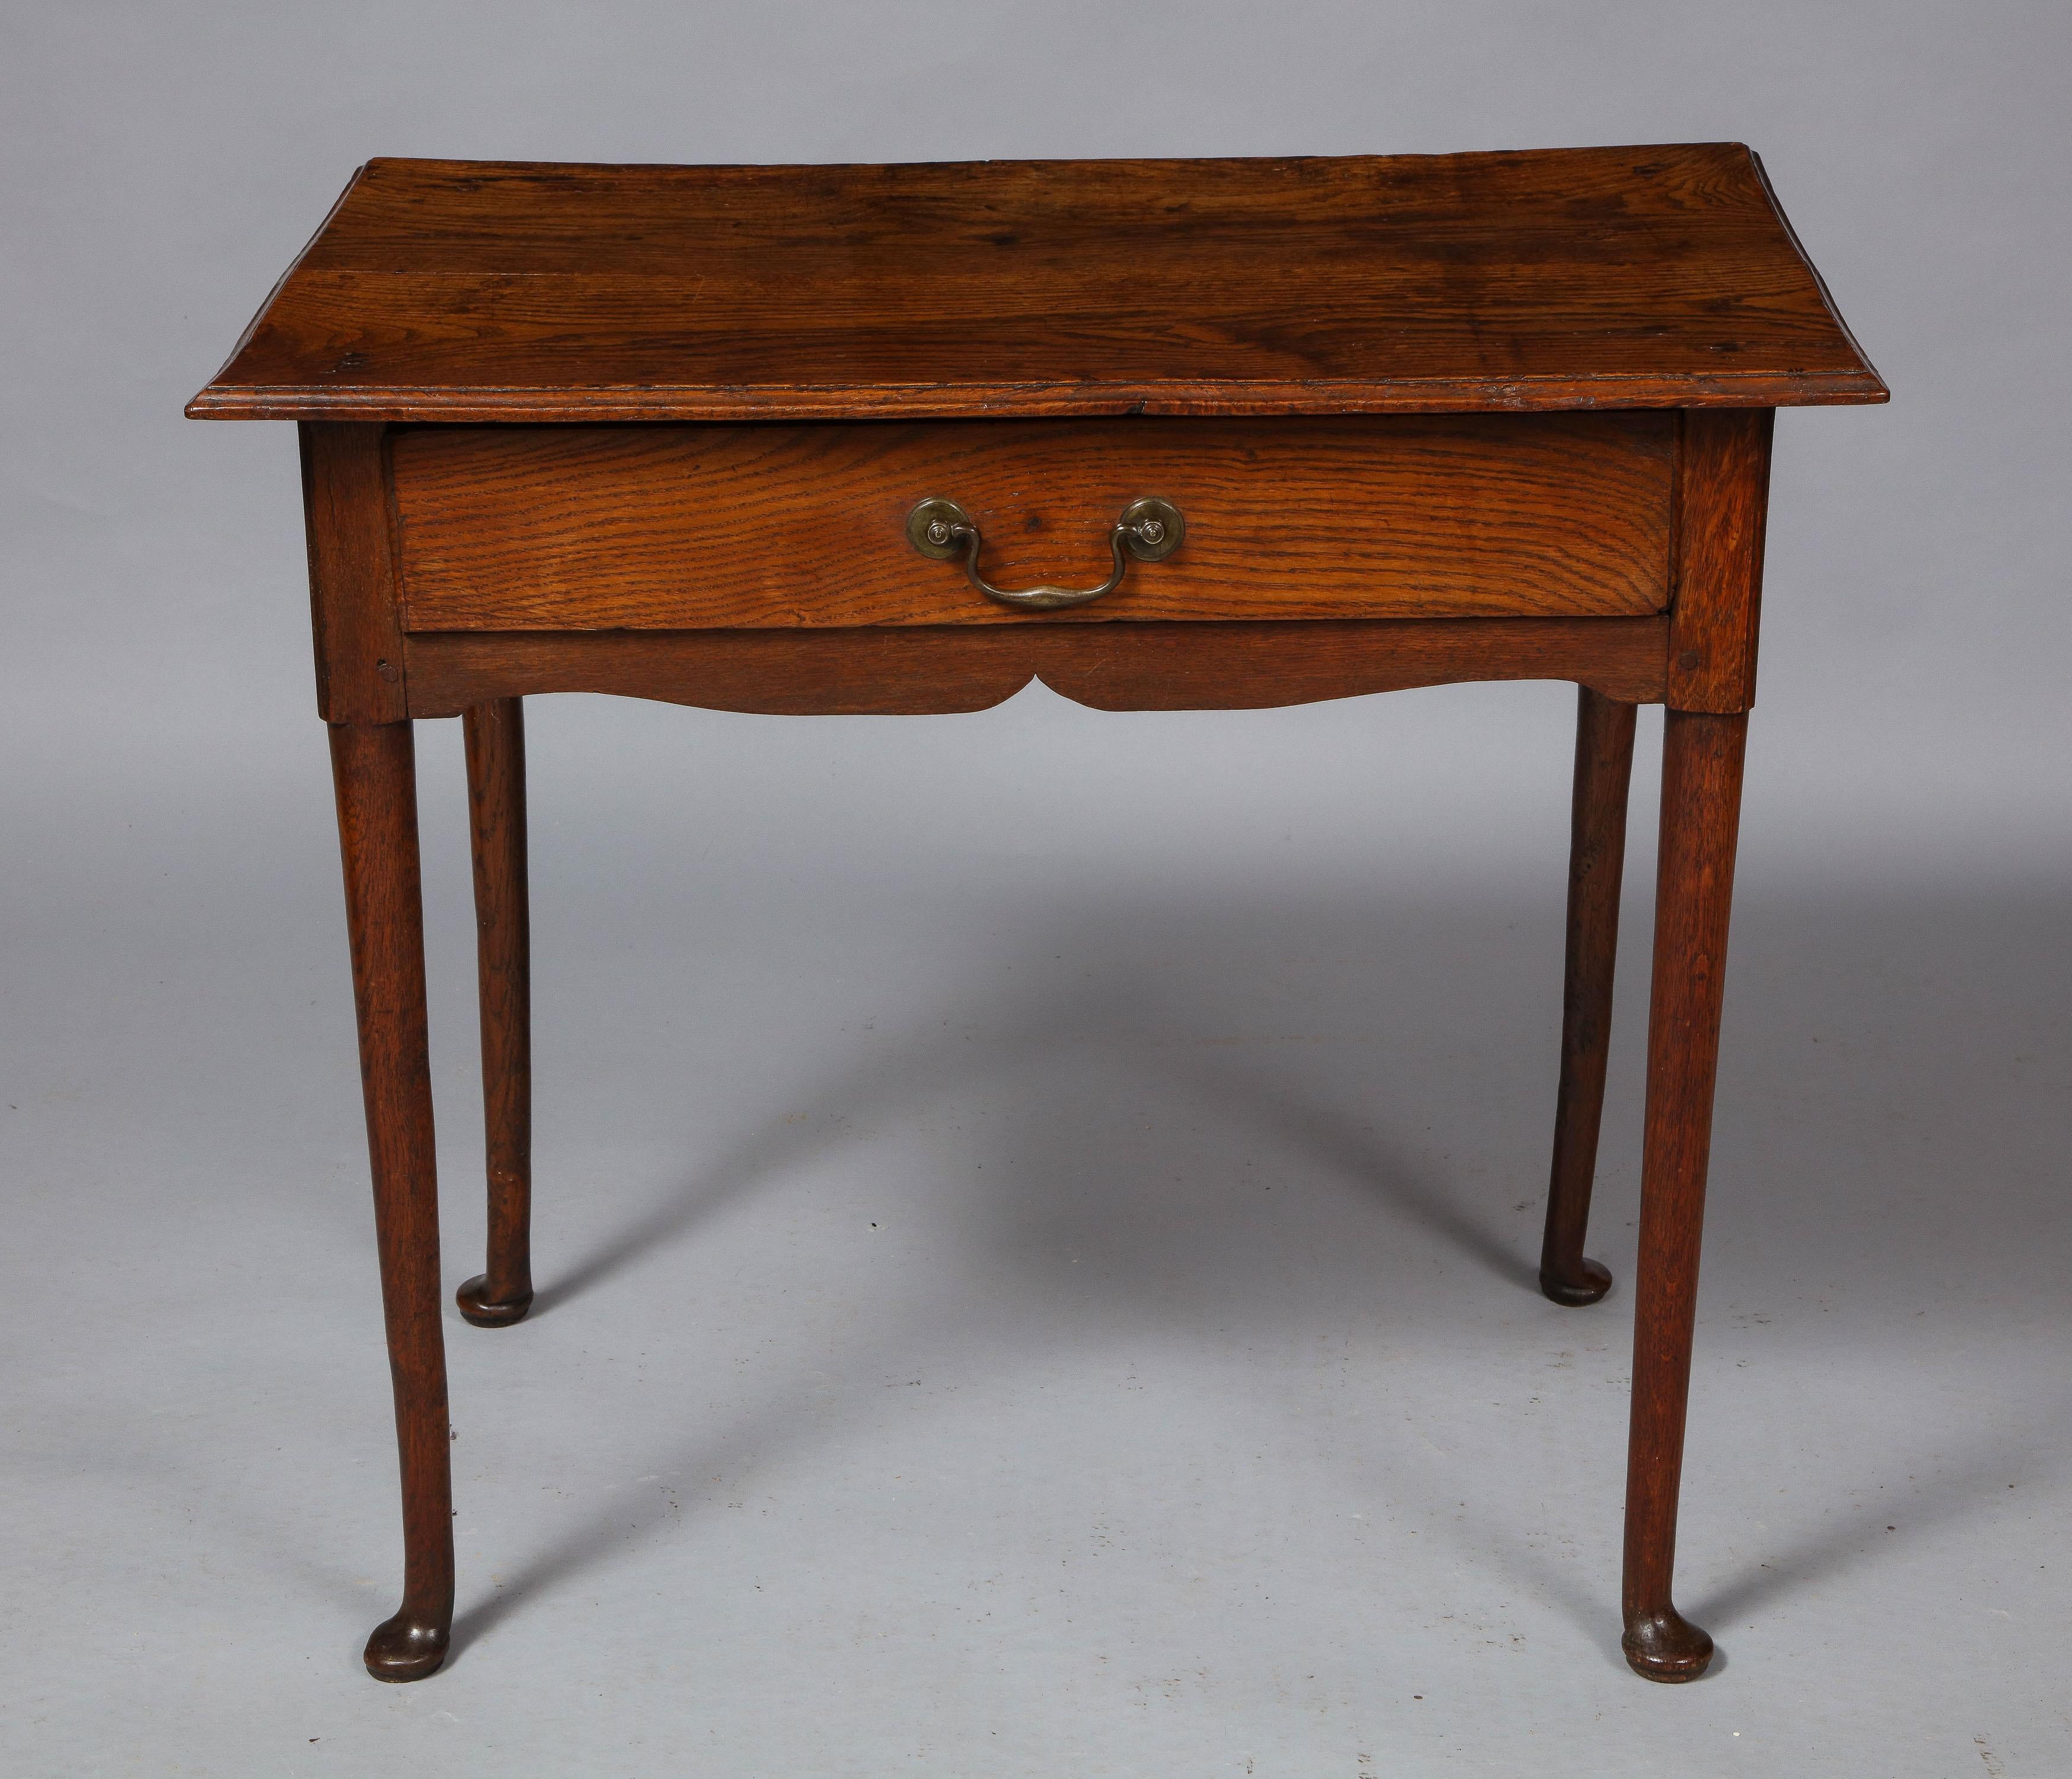 Fine 18th century English oak side table, the molded top over single drawer with brass bail handle, having gently scalloped apron, standing on turned legs ending in pad feet, the whole with good color and patina.